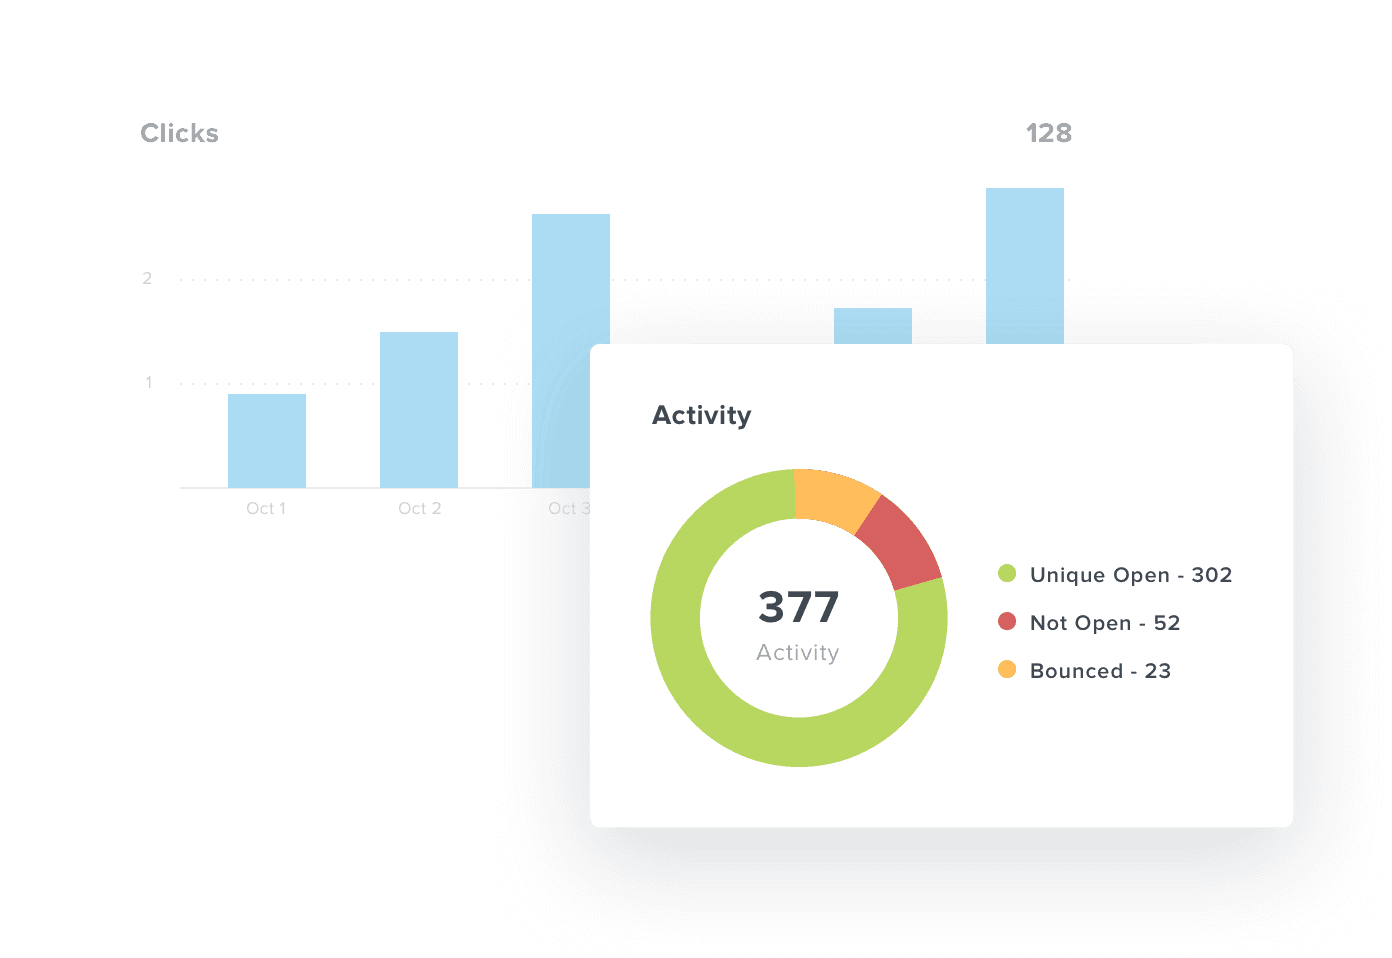 A sample chart of a Constant Contact dashboard